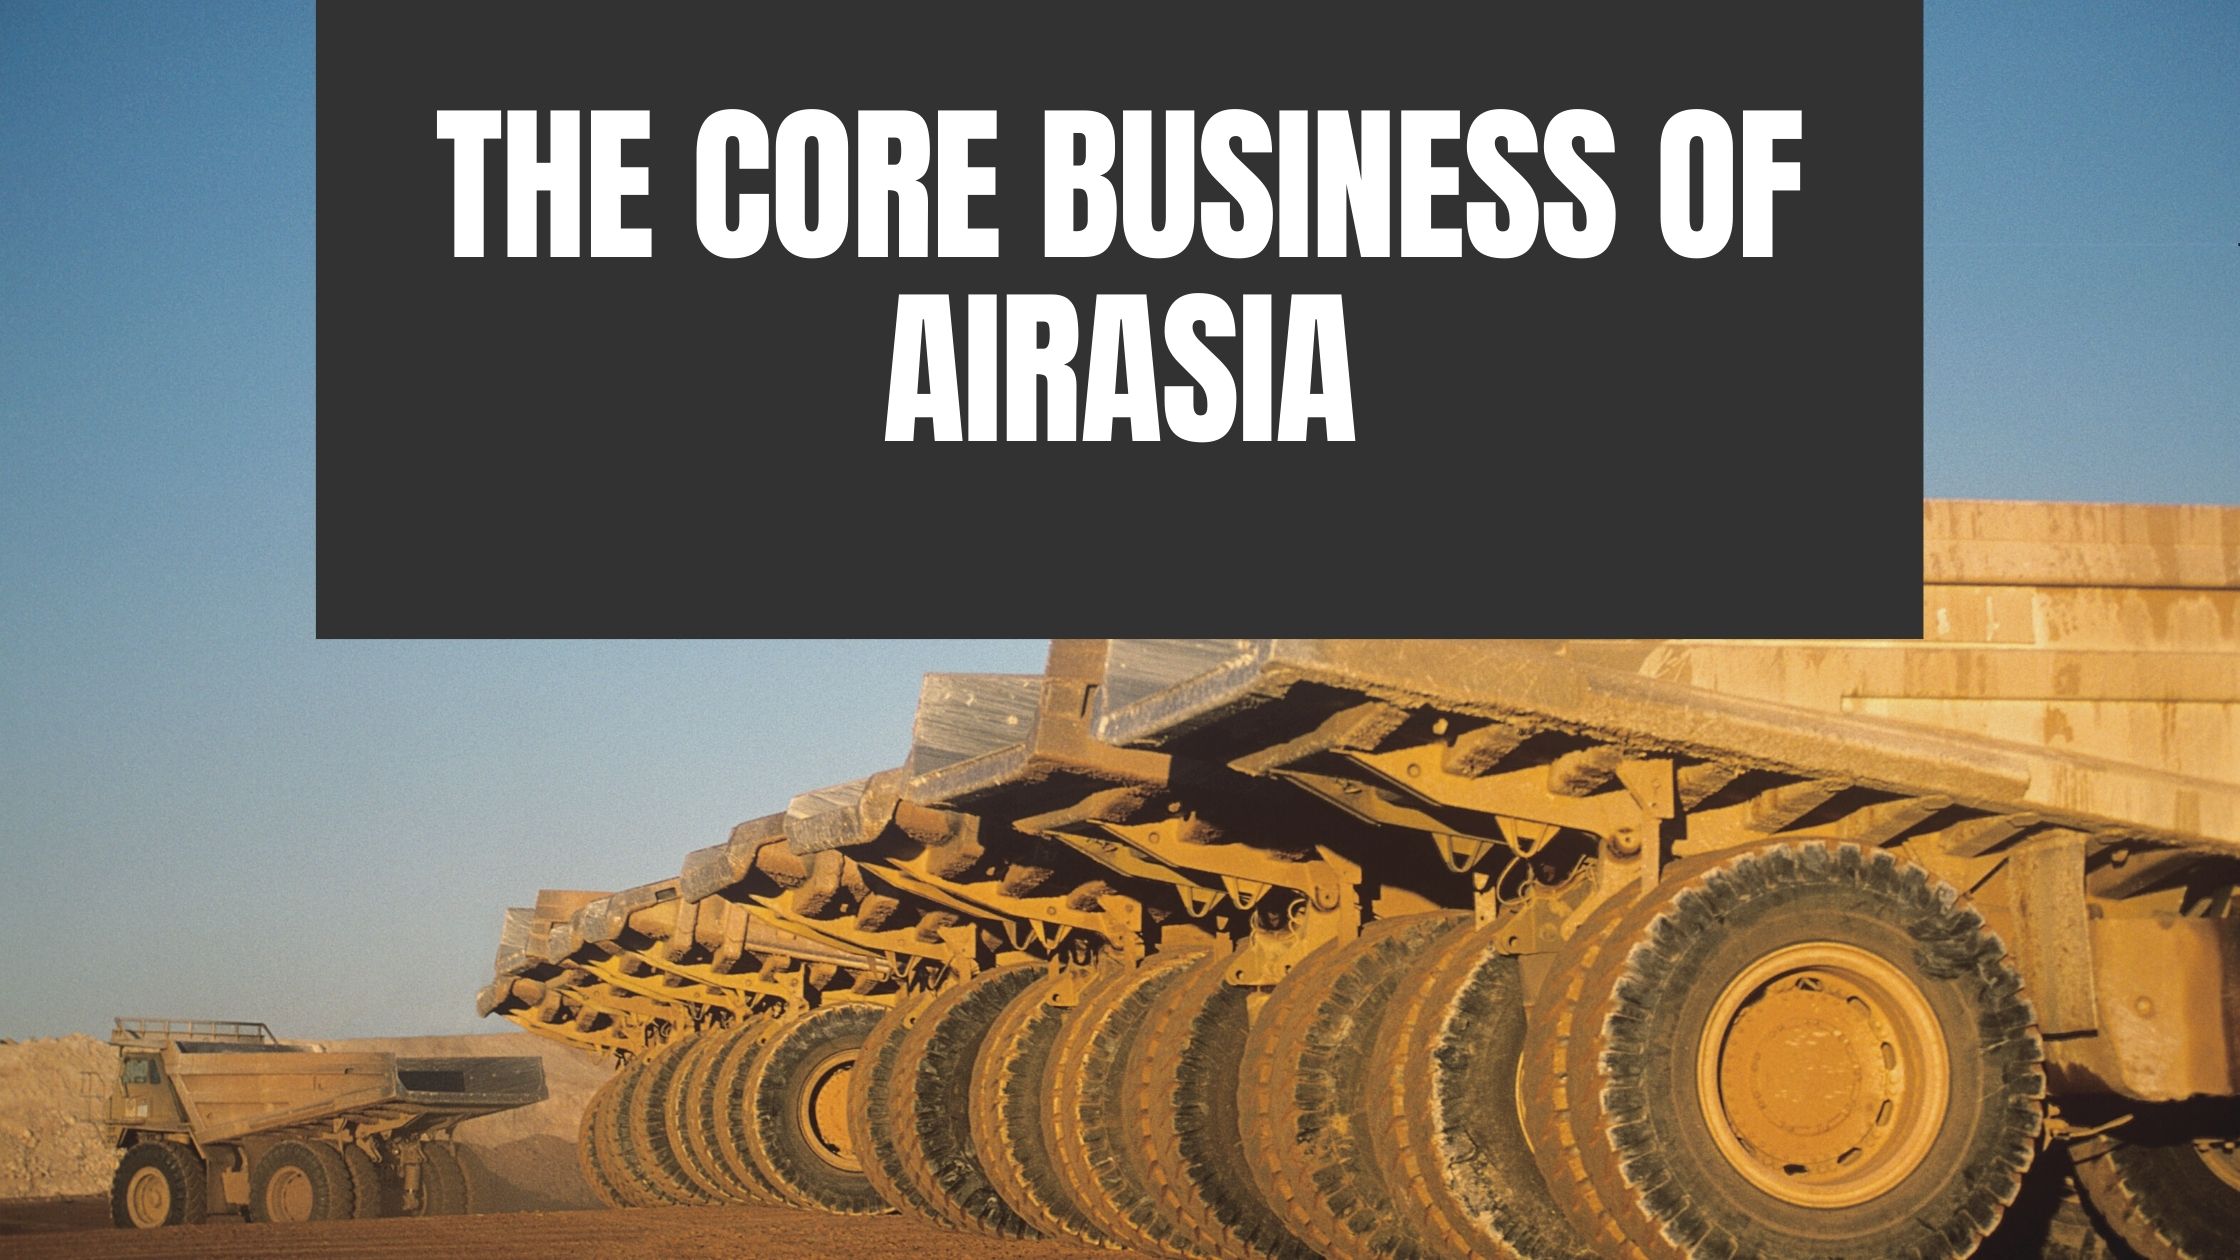 The core business of AirAsia